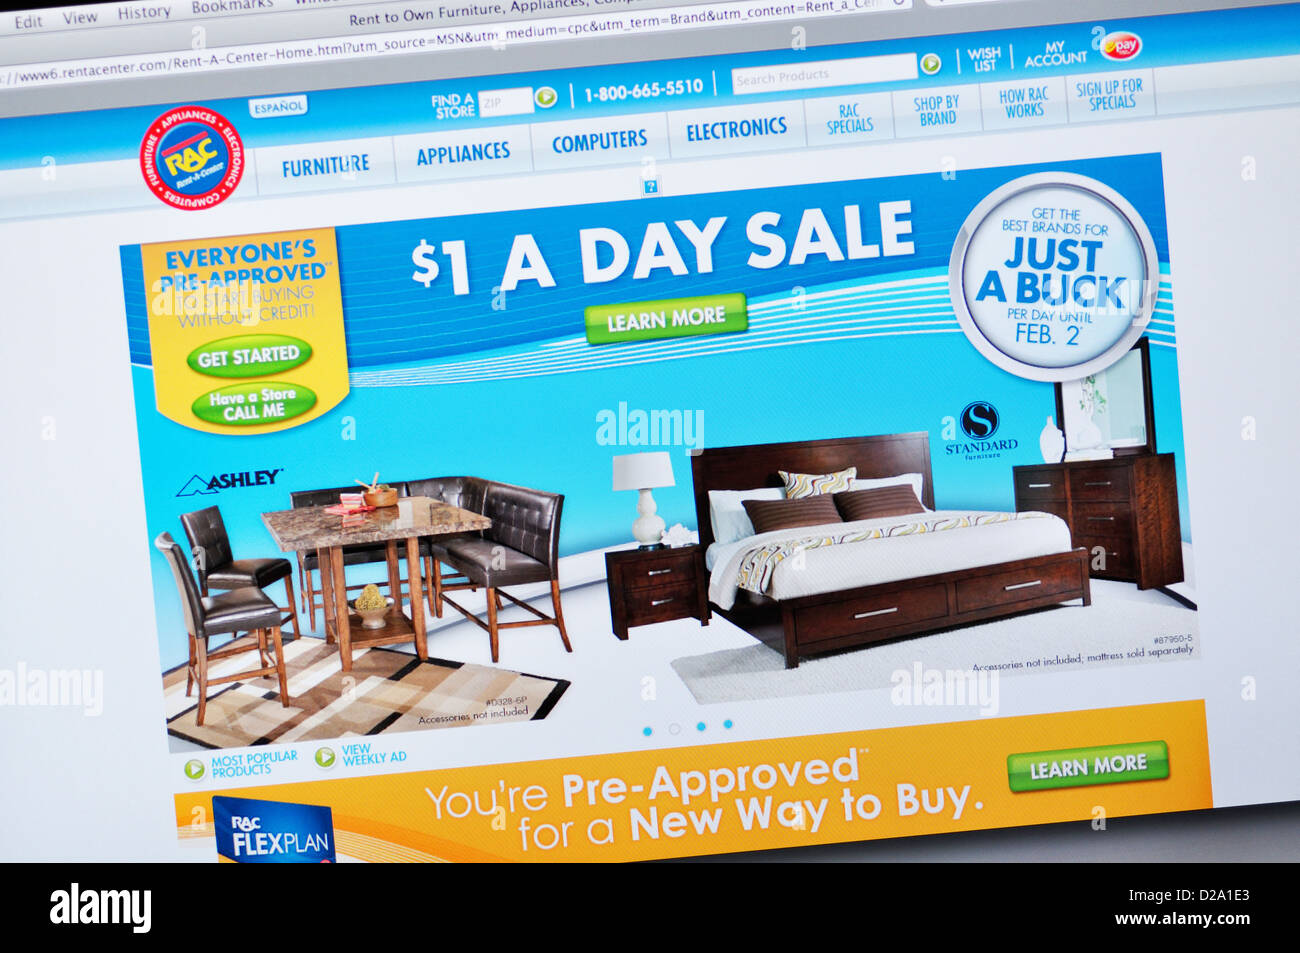 Rent A Center Website Online Furniture And Electronics Renting